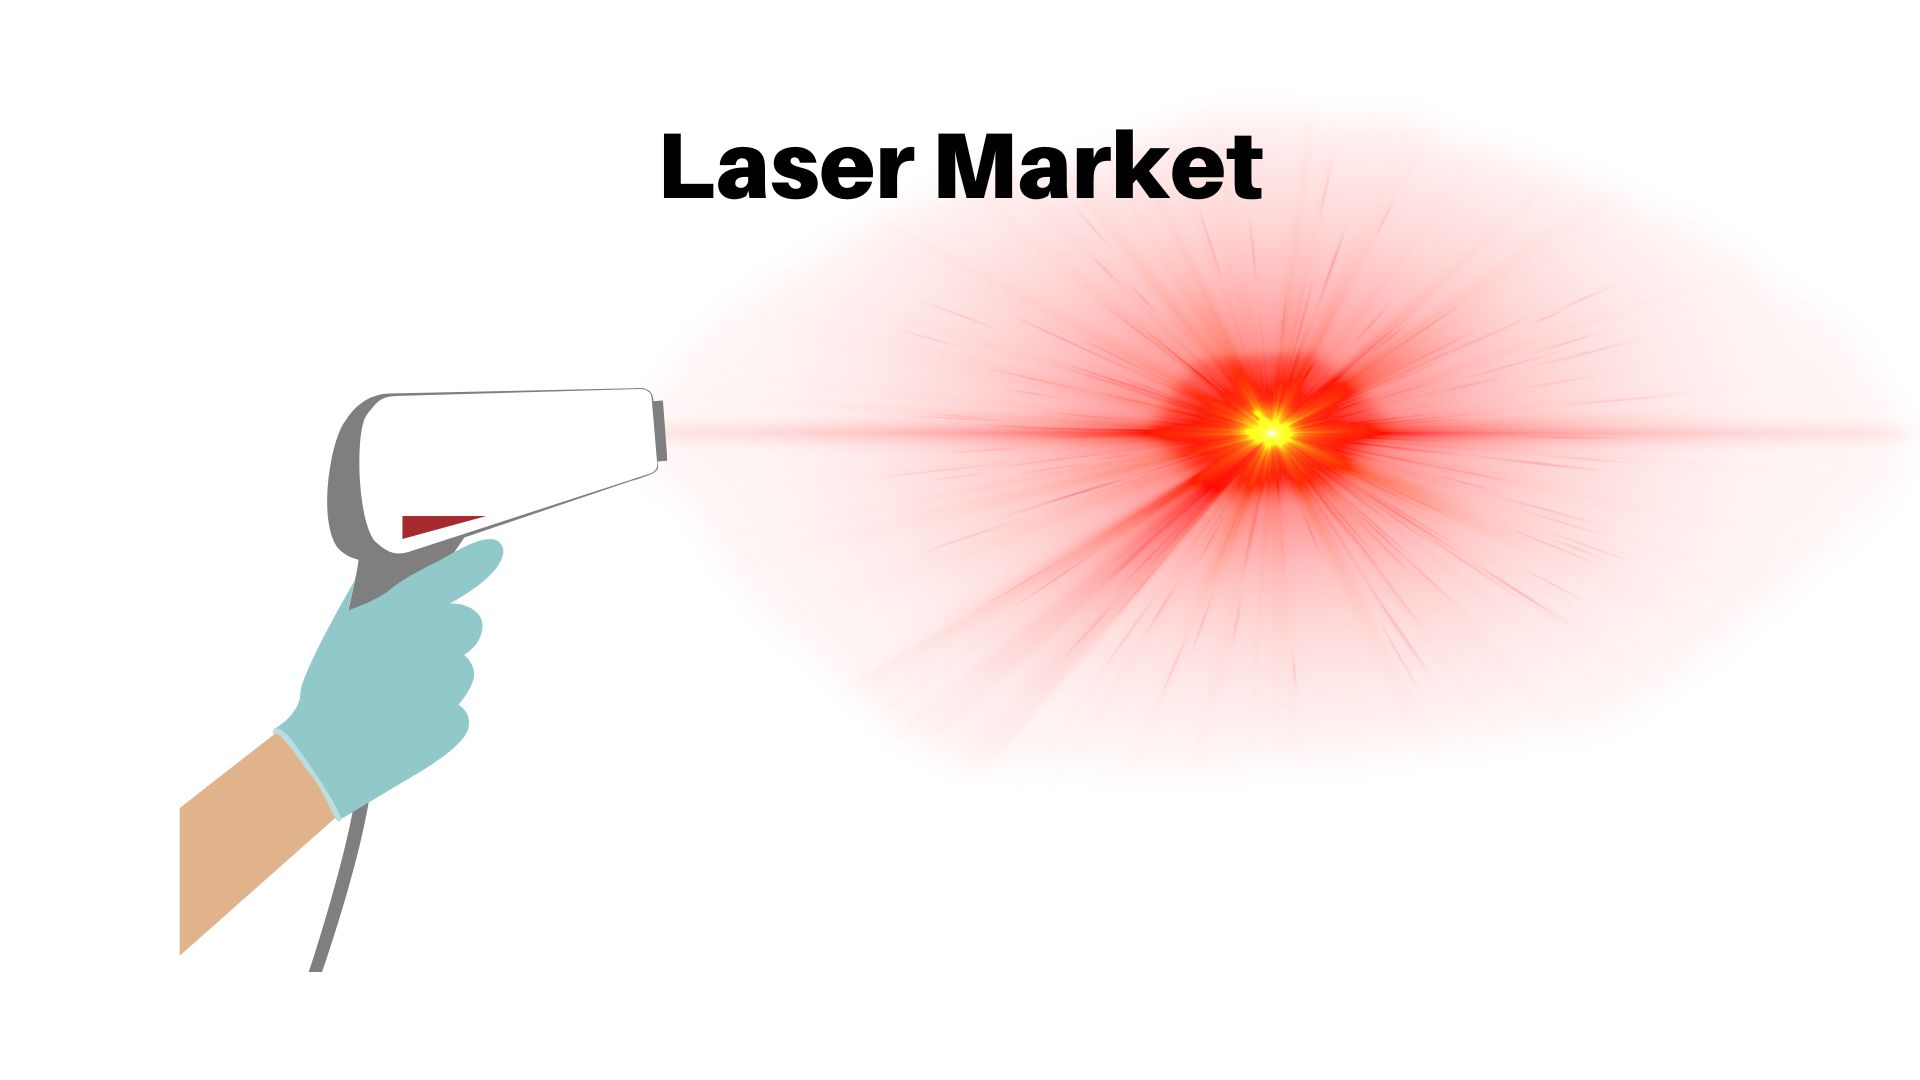 Laser Tracker Market is projected to reach USD 579.12 Million by 2032